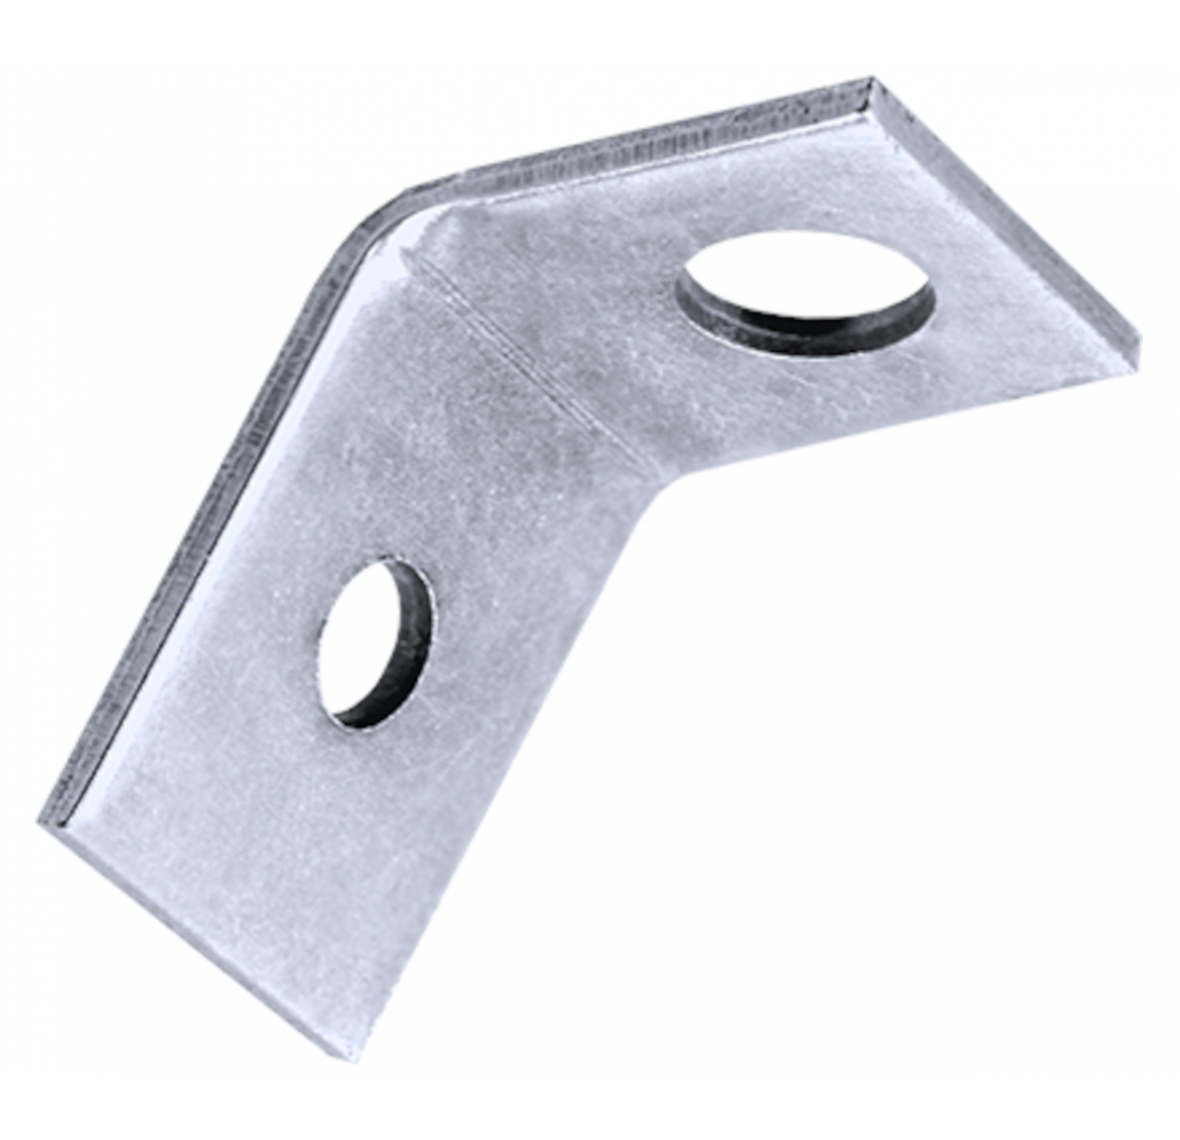 Ceiling Angle Bracket for Mechanical Fixing